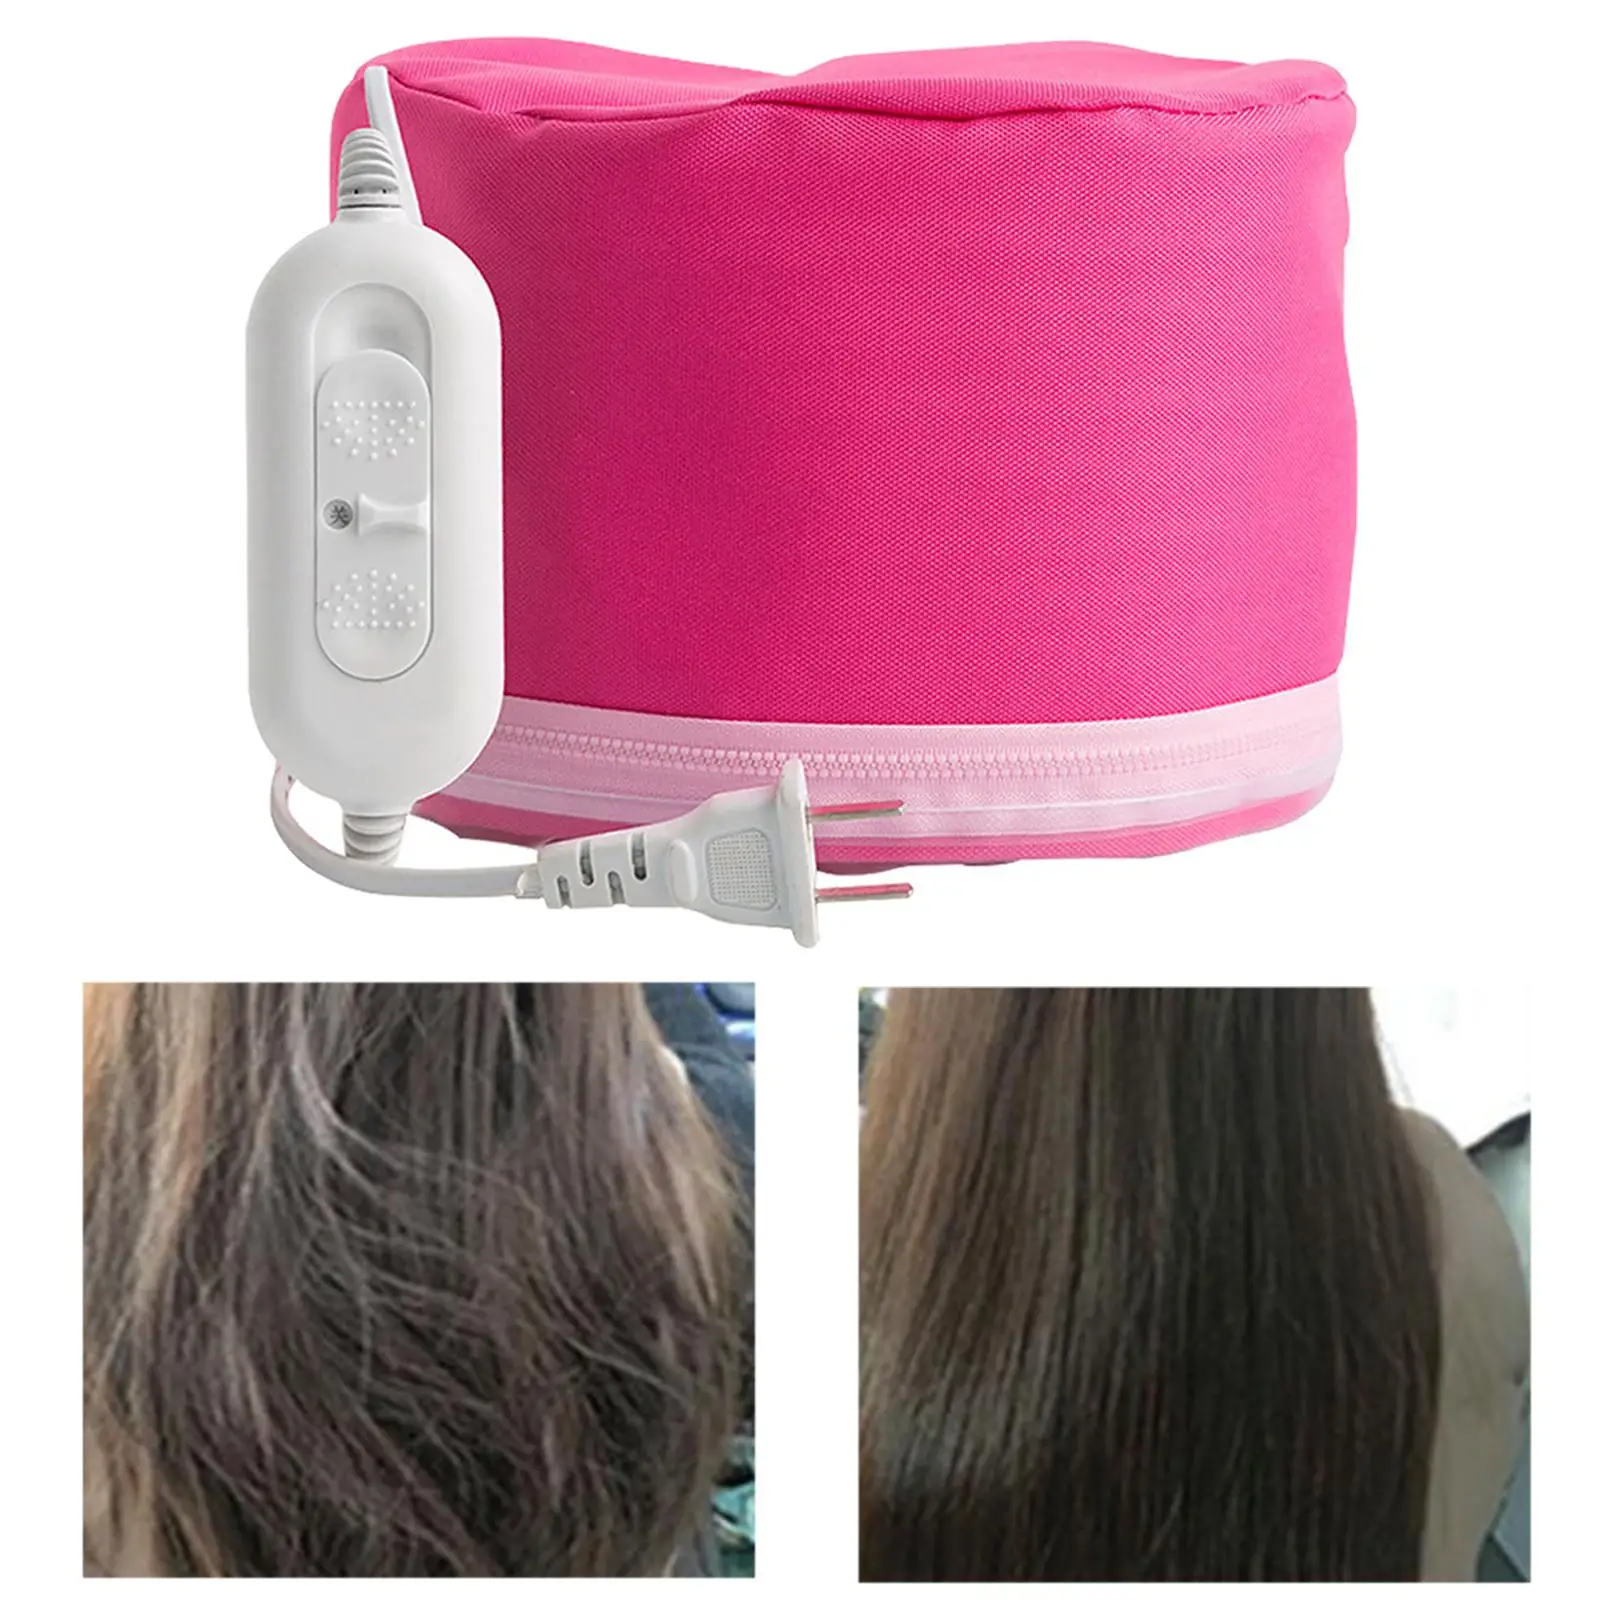 Hair Heating Caps Steamer 3-Mode Adjustable Size Essential Oil Caps Microwave Hot Caps for Deep Conditioning Home Salon Drying